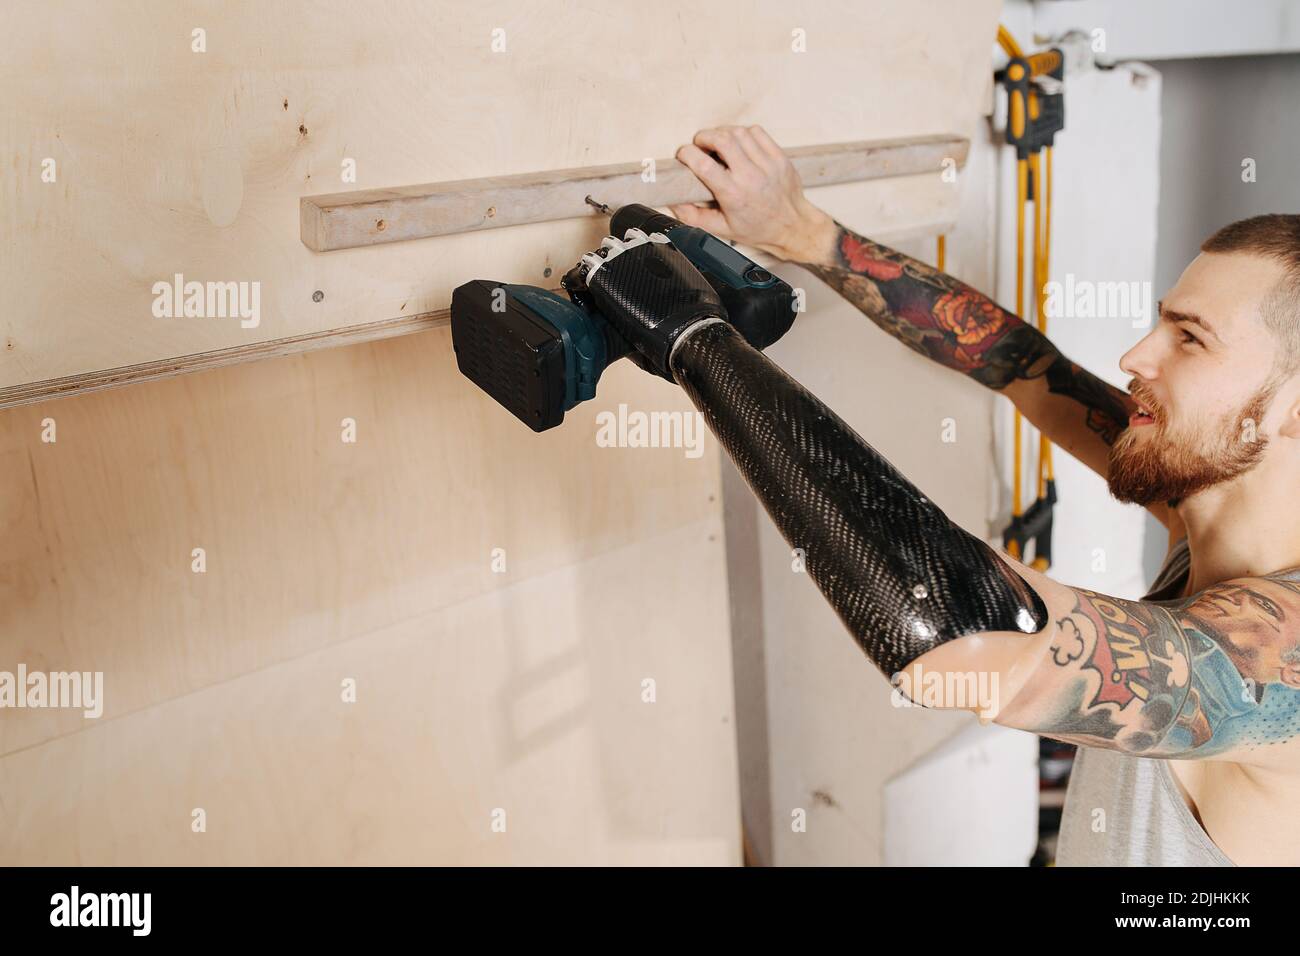 Crafty cyborg man with bionic hand working with cordless electric screwdriver Stock Photo